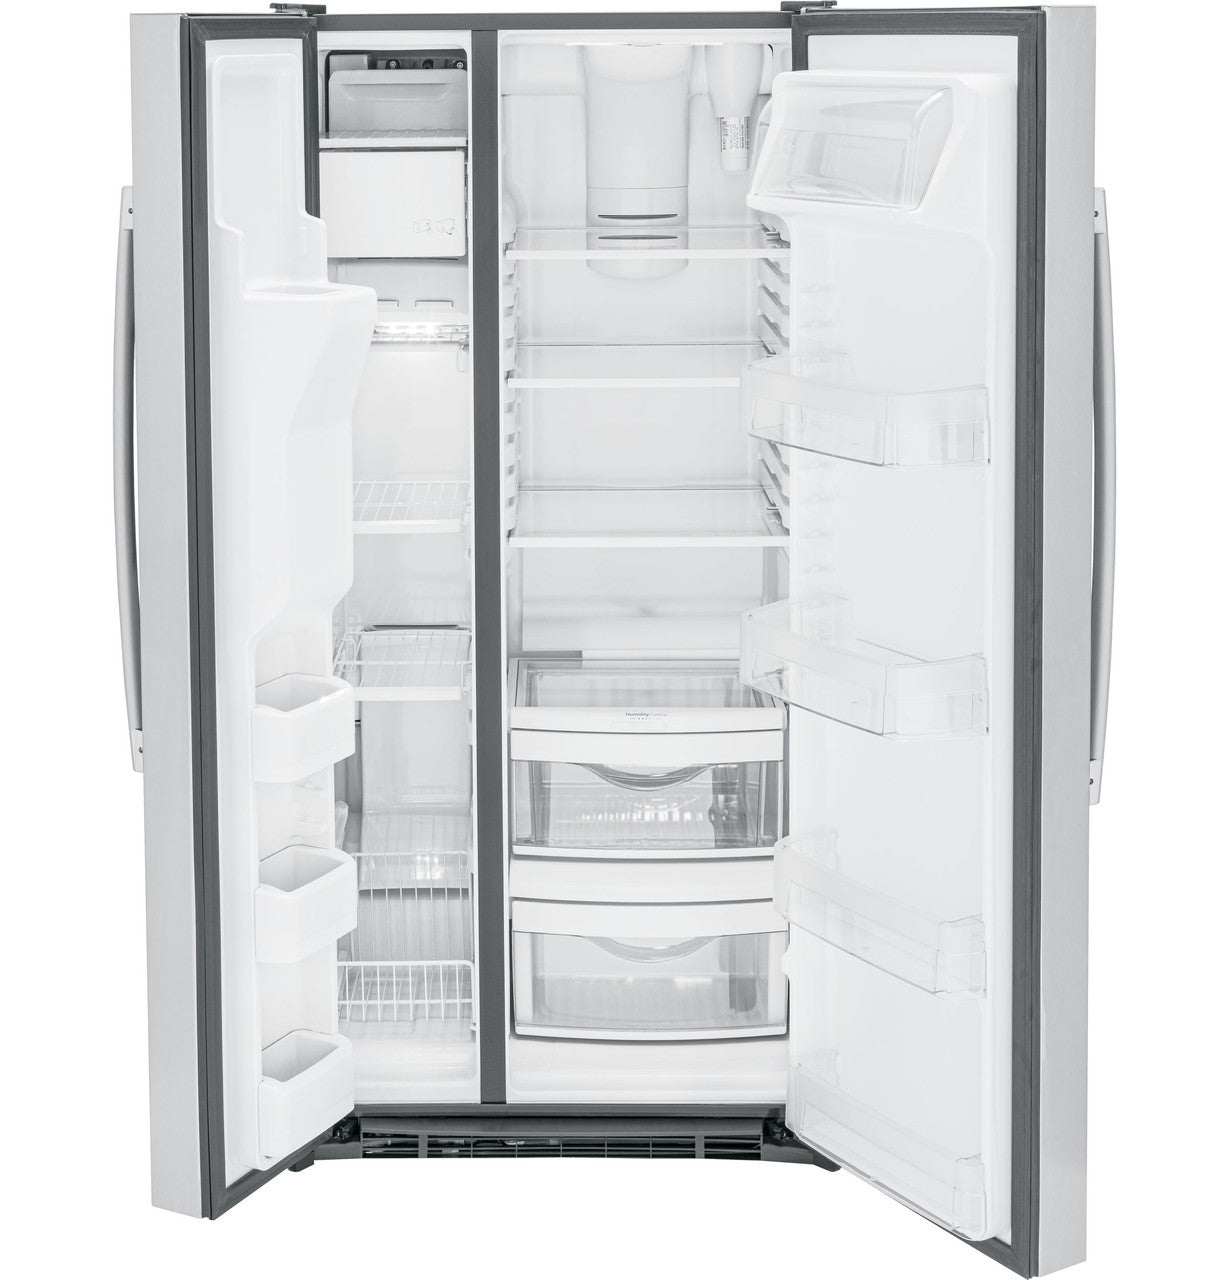 GE - 32.75 Inch 23.2 cu. ft Side by Side Refrigerator in Stainless - GSS23GYPFS